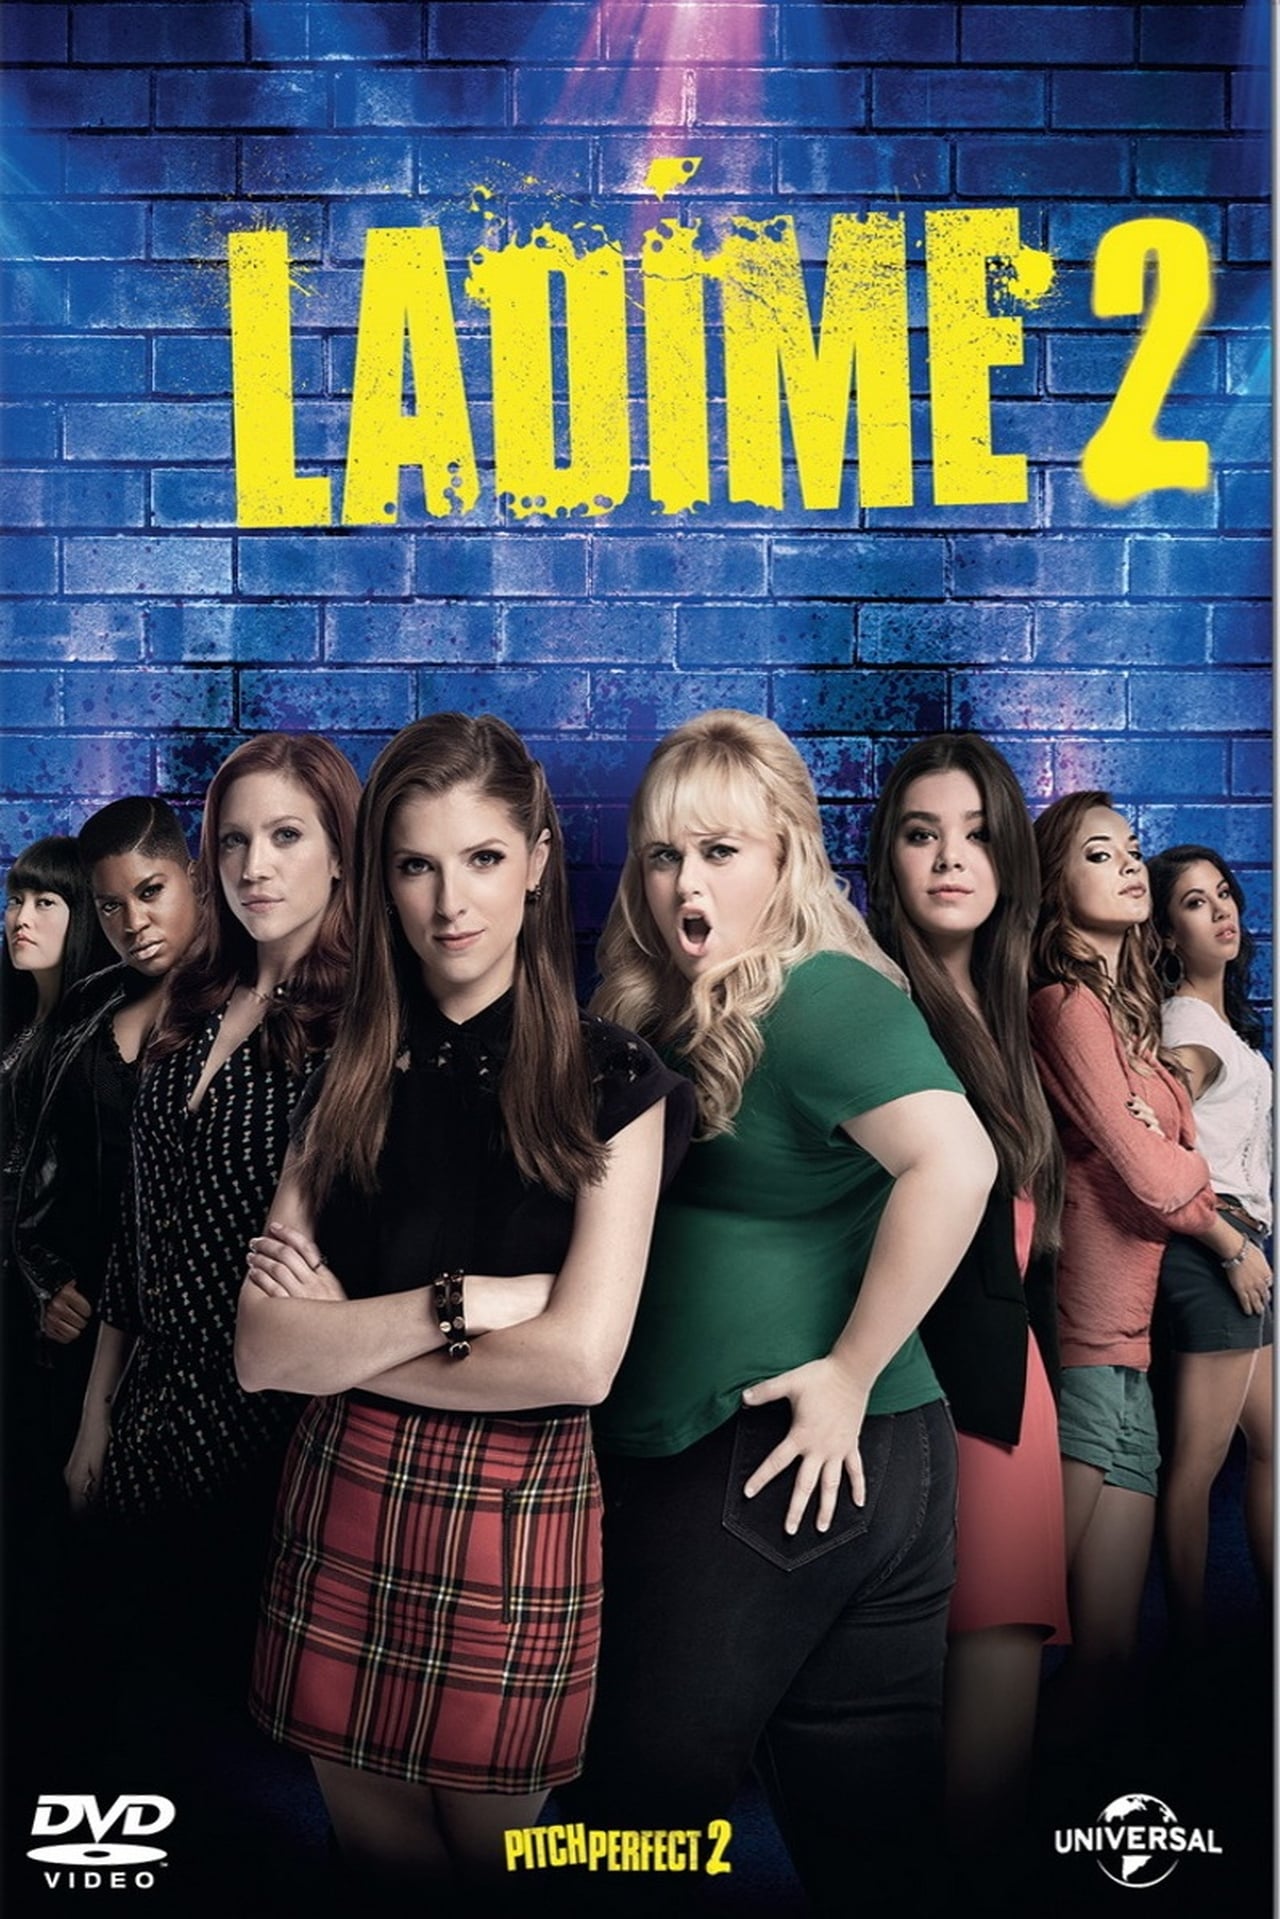 Pitch perfect 2 full movie free no download online